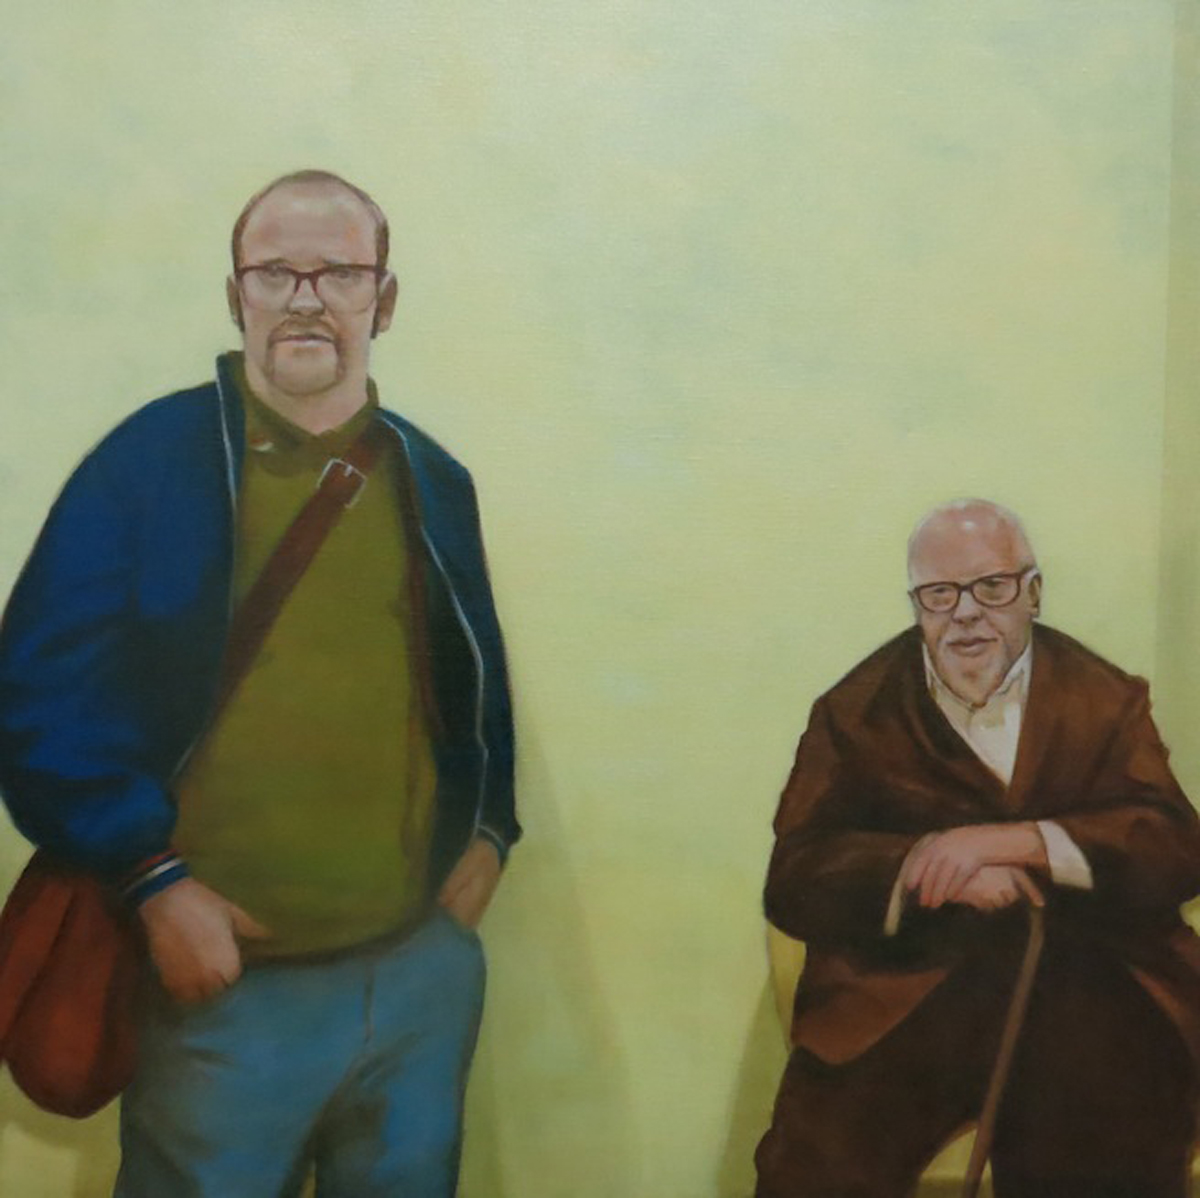 The Popfather and the Funk (2015), Oil on Linen, 76.2 x 76.2cm